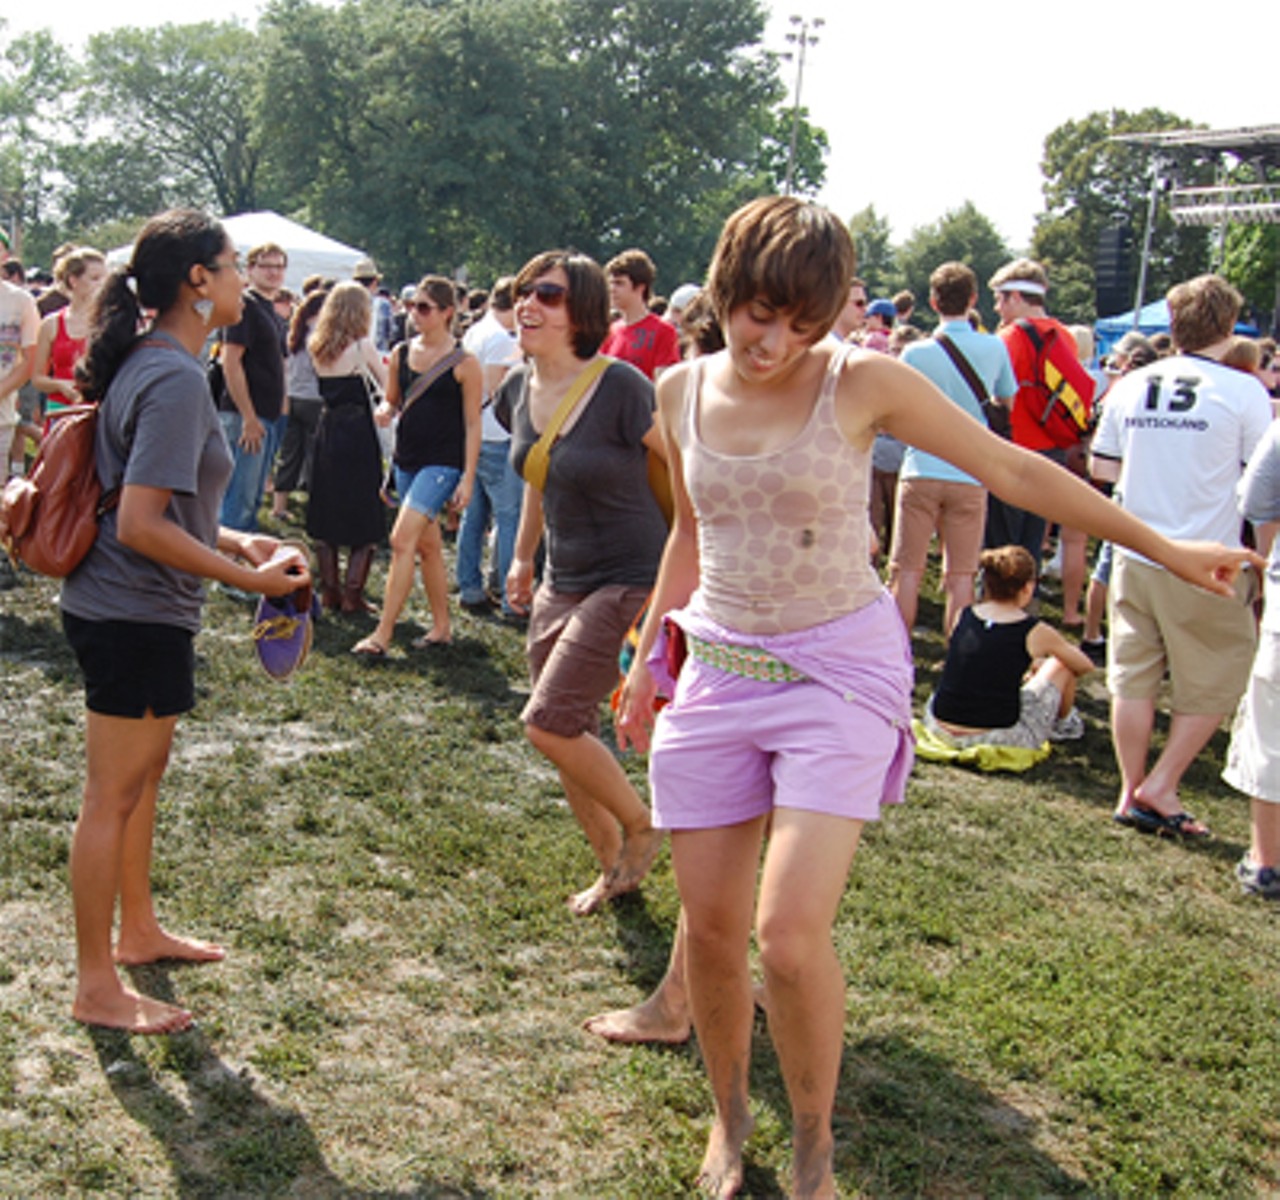 Big purple shorts and dancing in the mud, a free-spirited get-down.
Click here for set reviews and  more photos from Pitchfork '08.